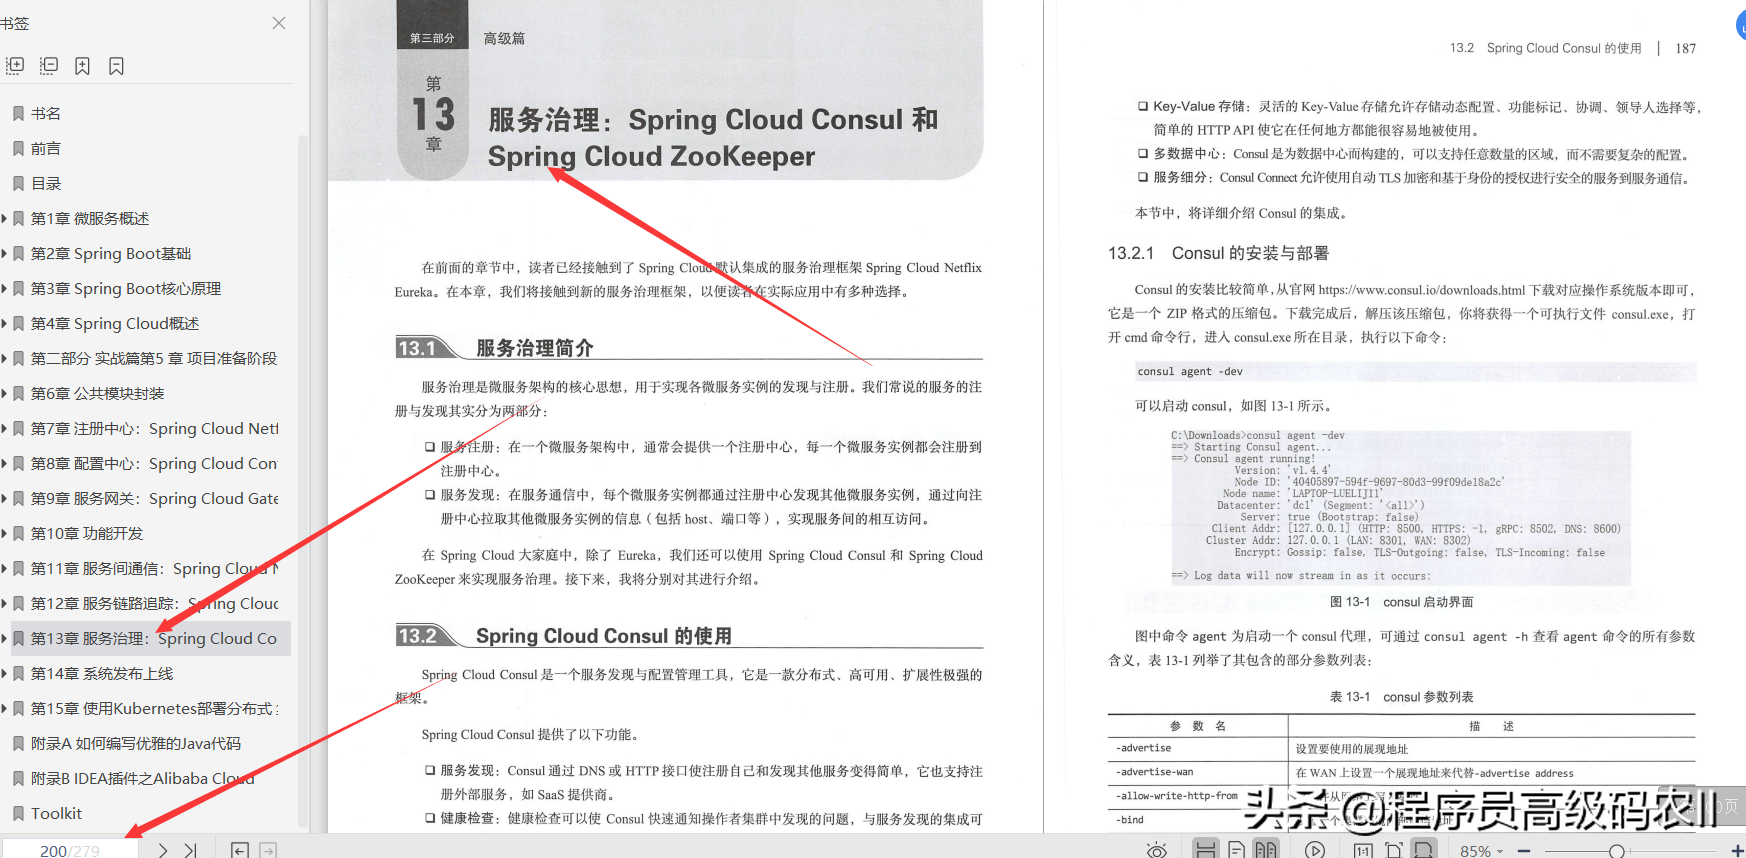 Without 7 years of experience, you can't really learn this SpringCloud practical exercise document